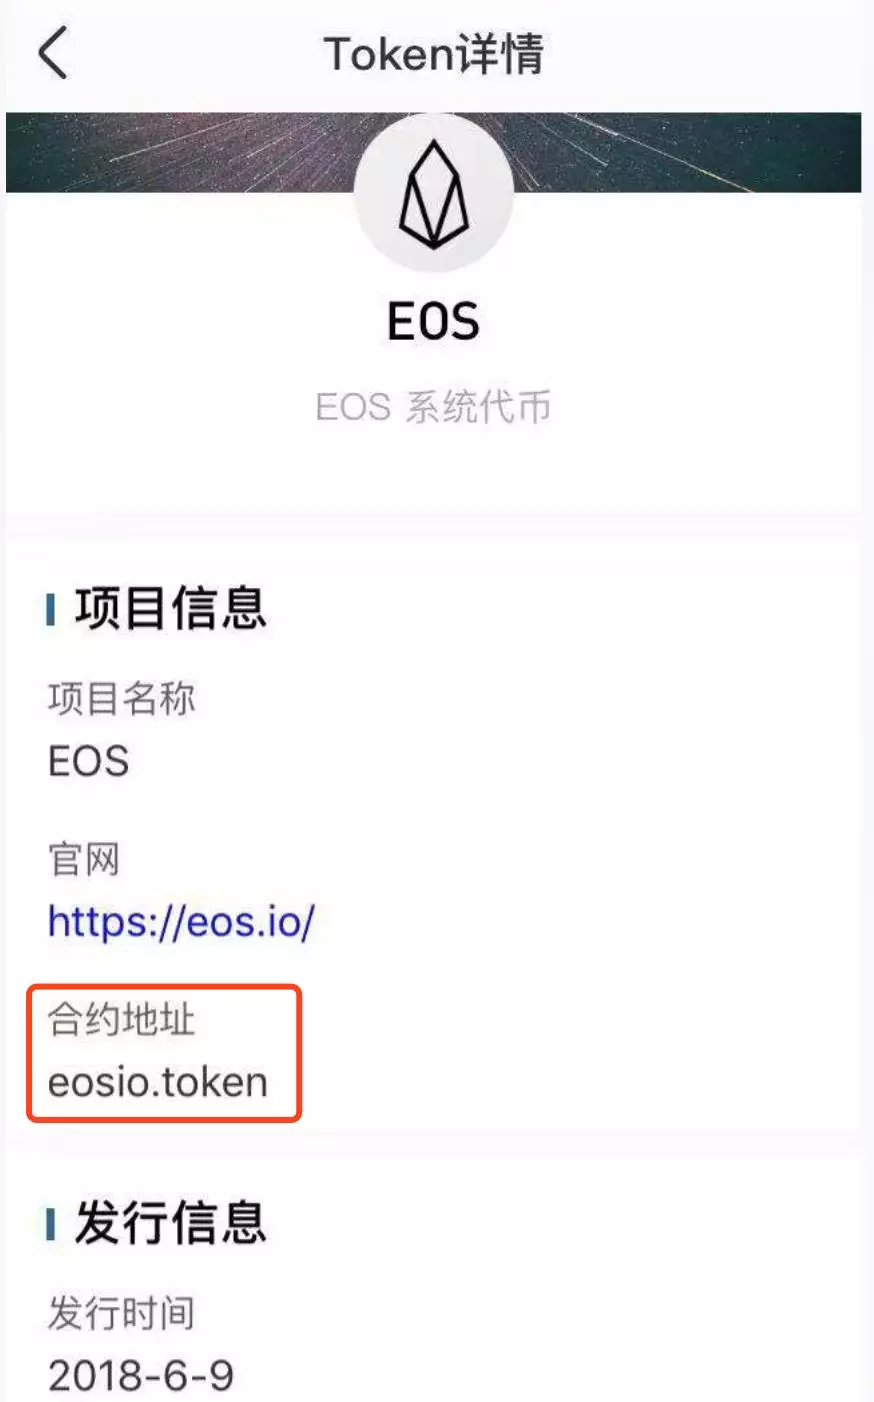 Getting started with blockchain | Stunning EOS counterfeit!  How come, how to identify?